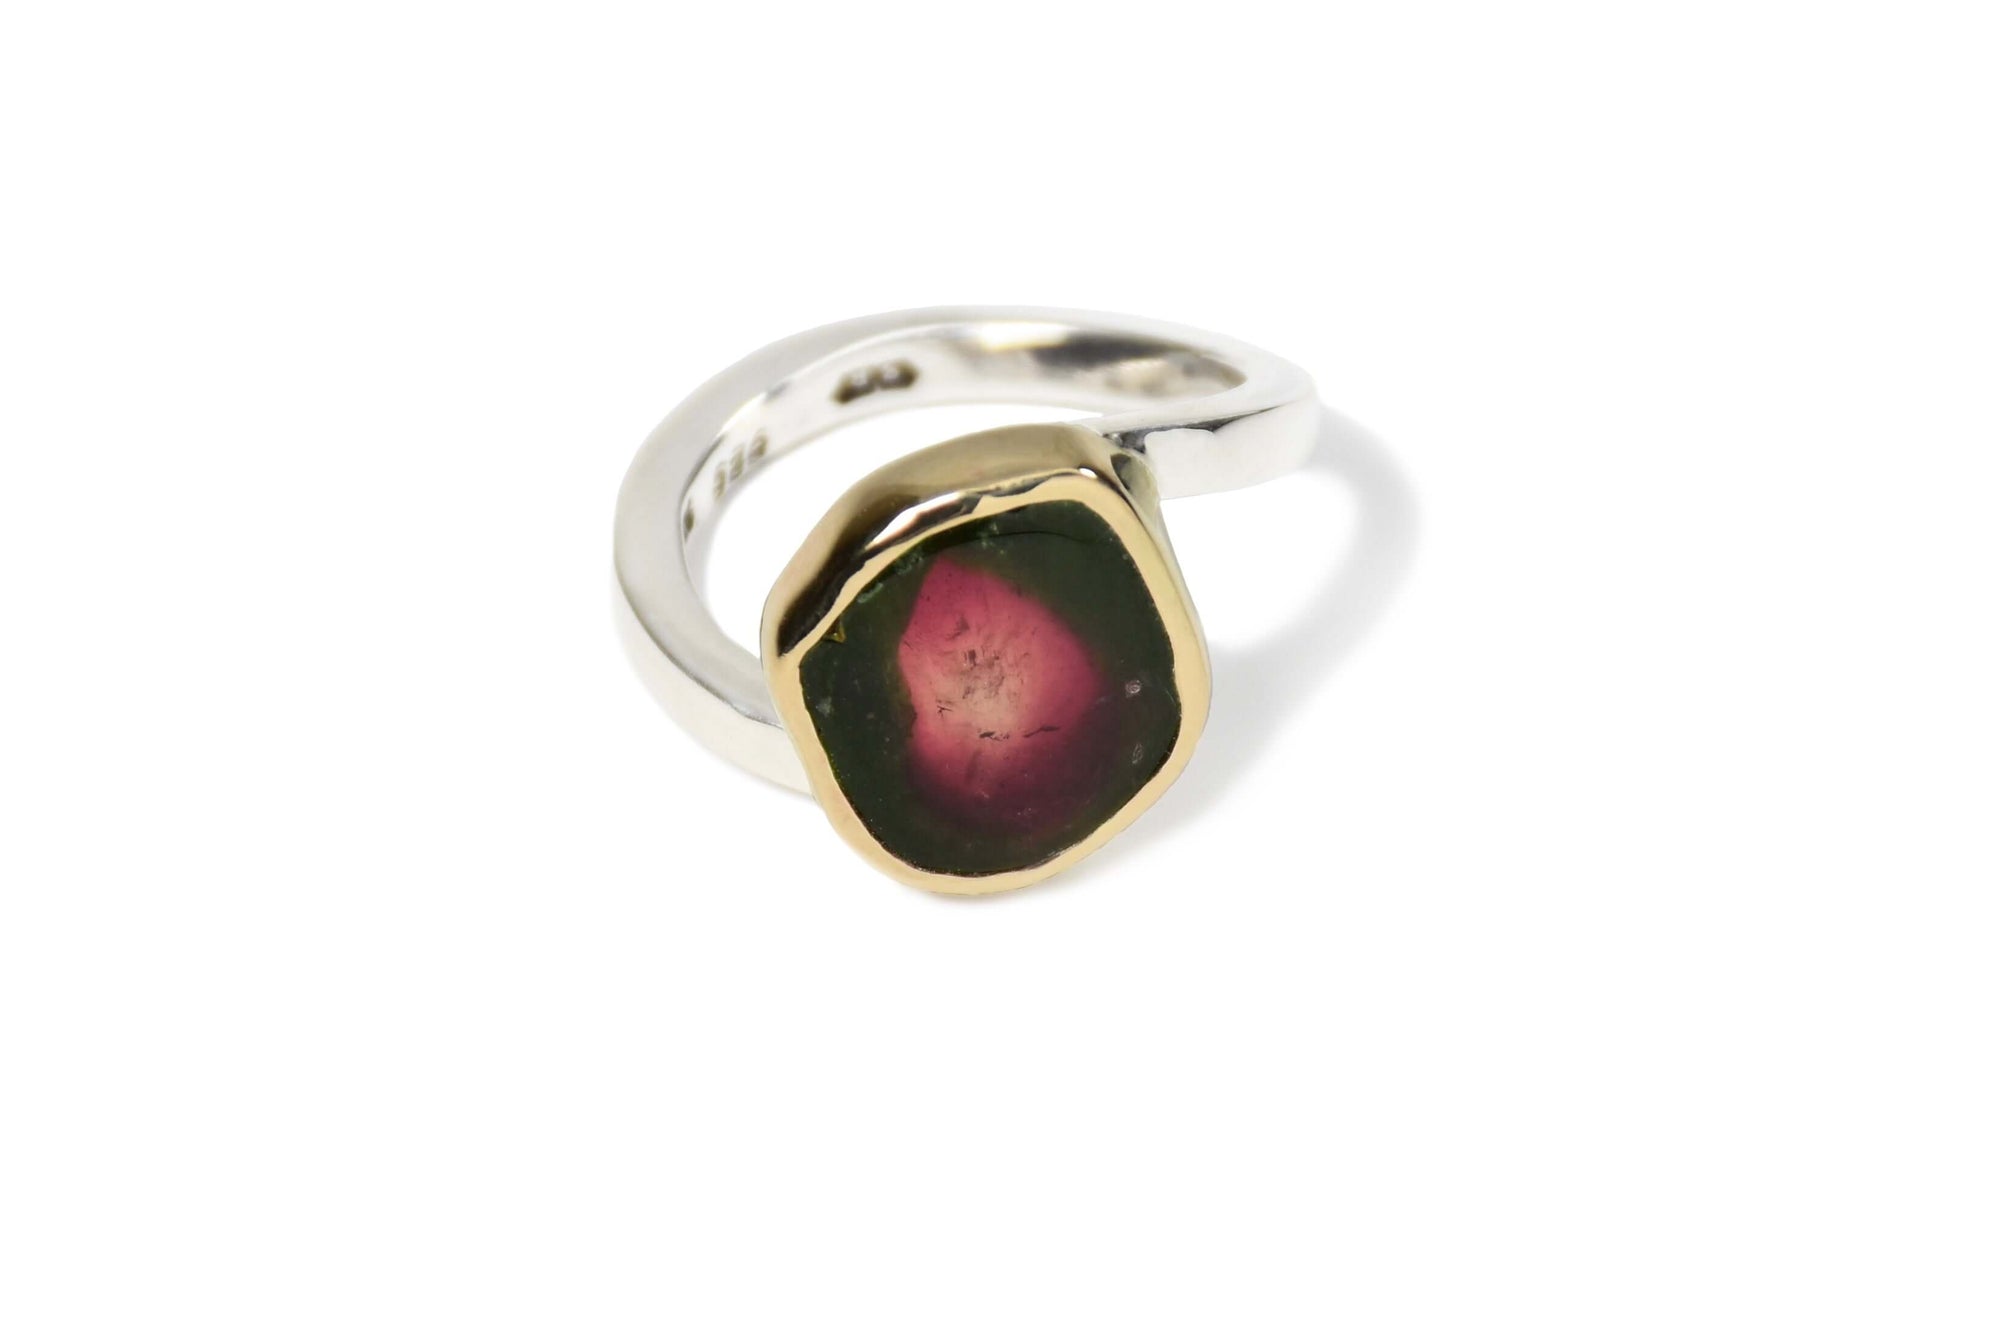 A sterling silver and 14k gold watermelon tourmaline ring